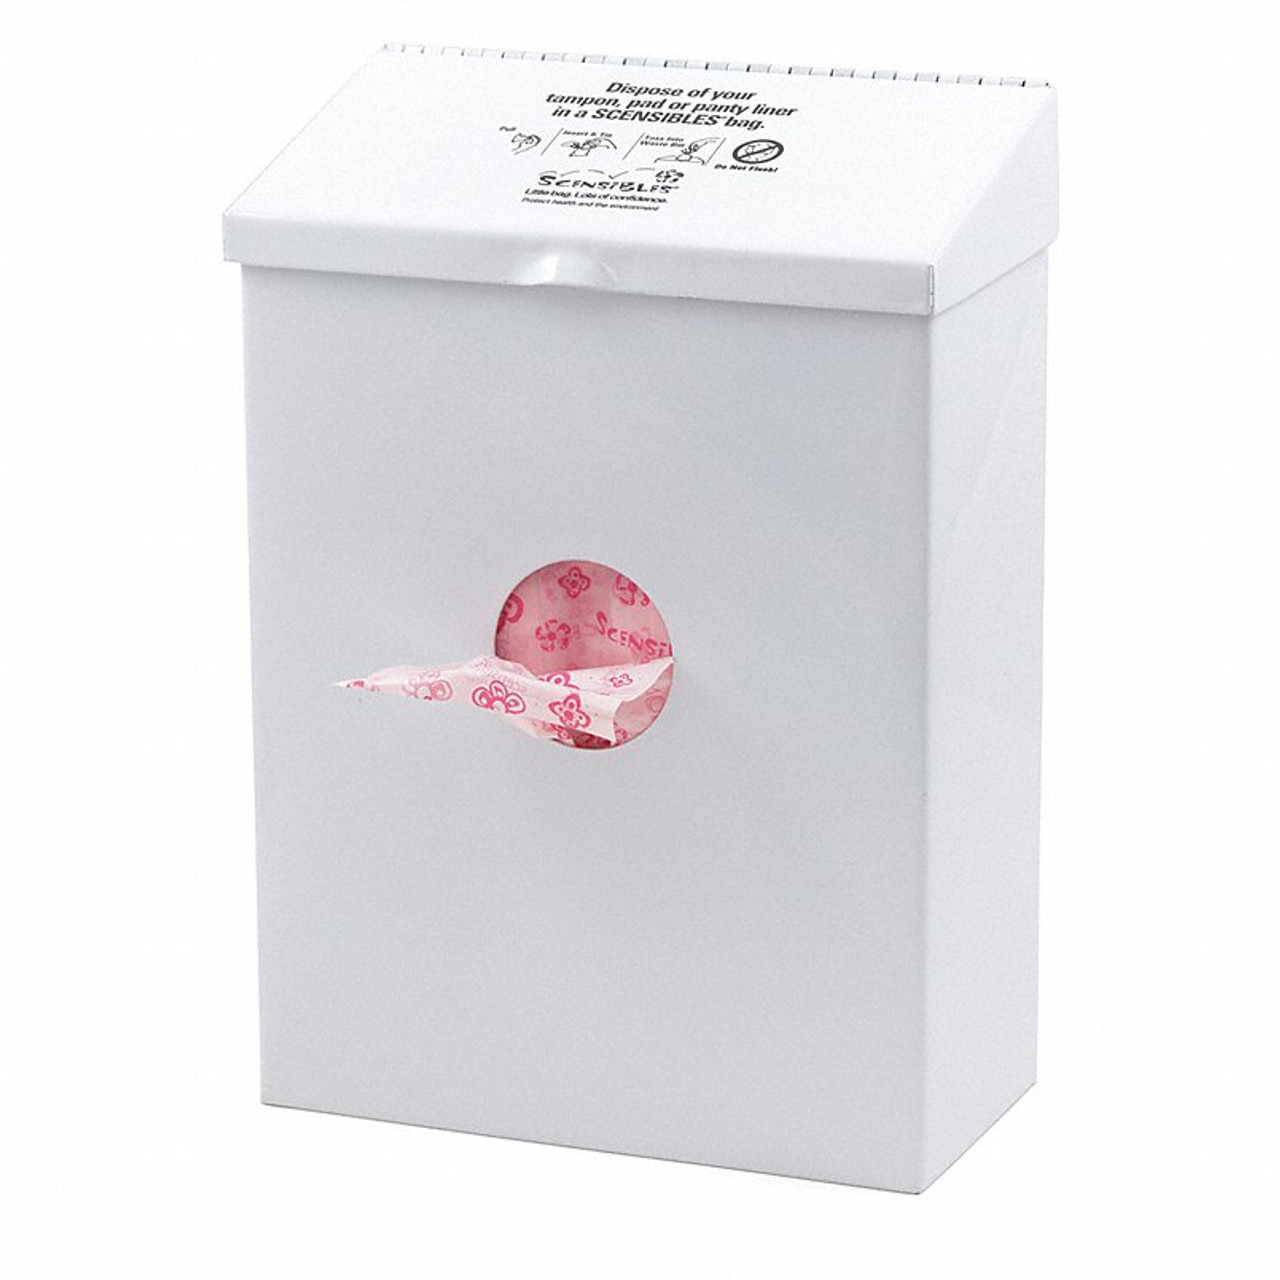 Scensibles Sanitary Napkin Receptacle with Bag Dispenser: Wall-Mounted, 8  x 11 x 4